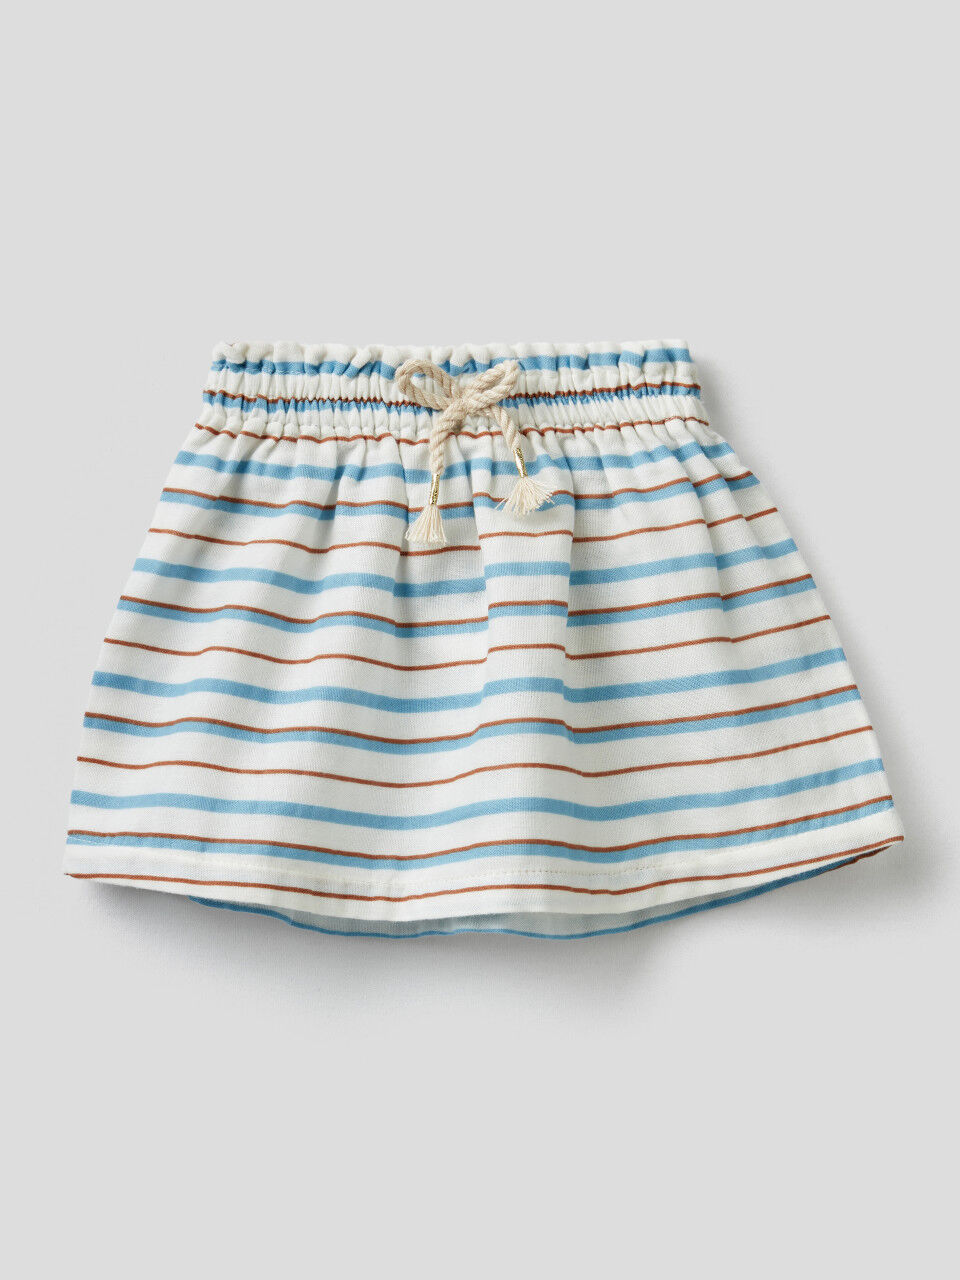 Patterned skirt in pure cotton